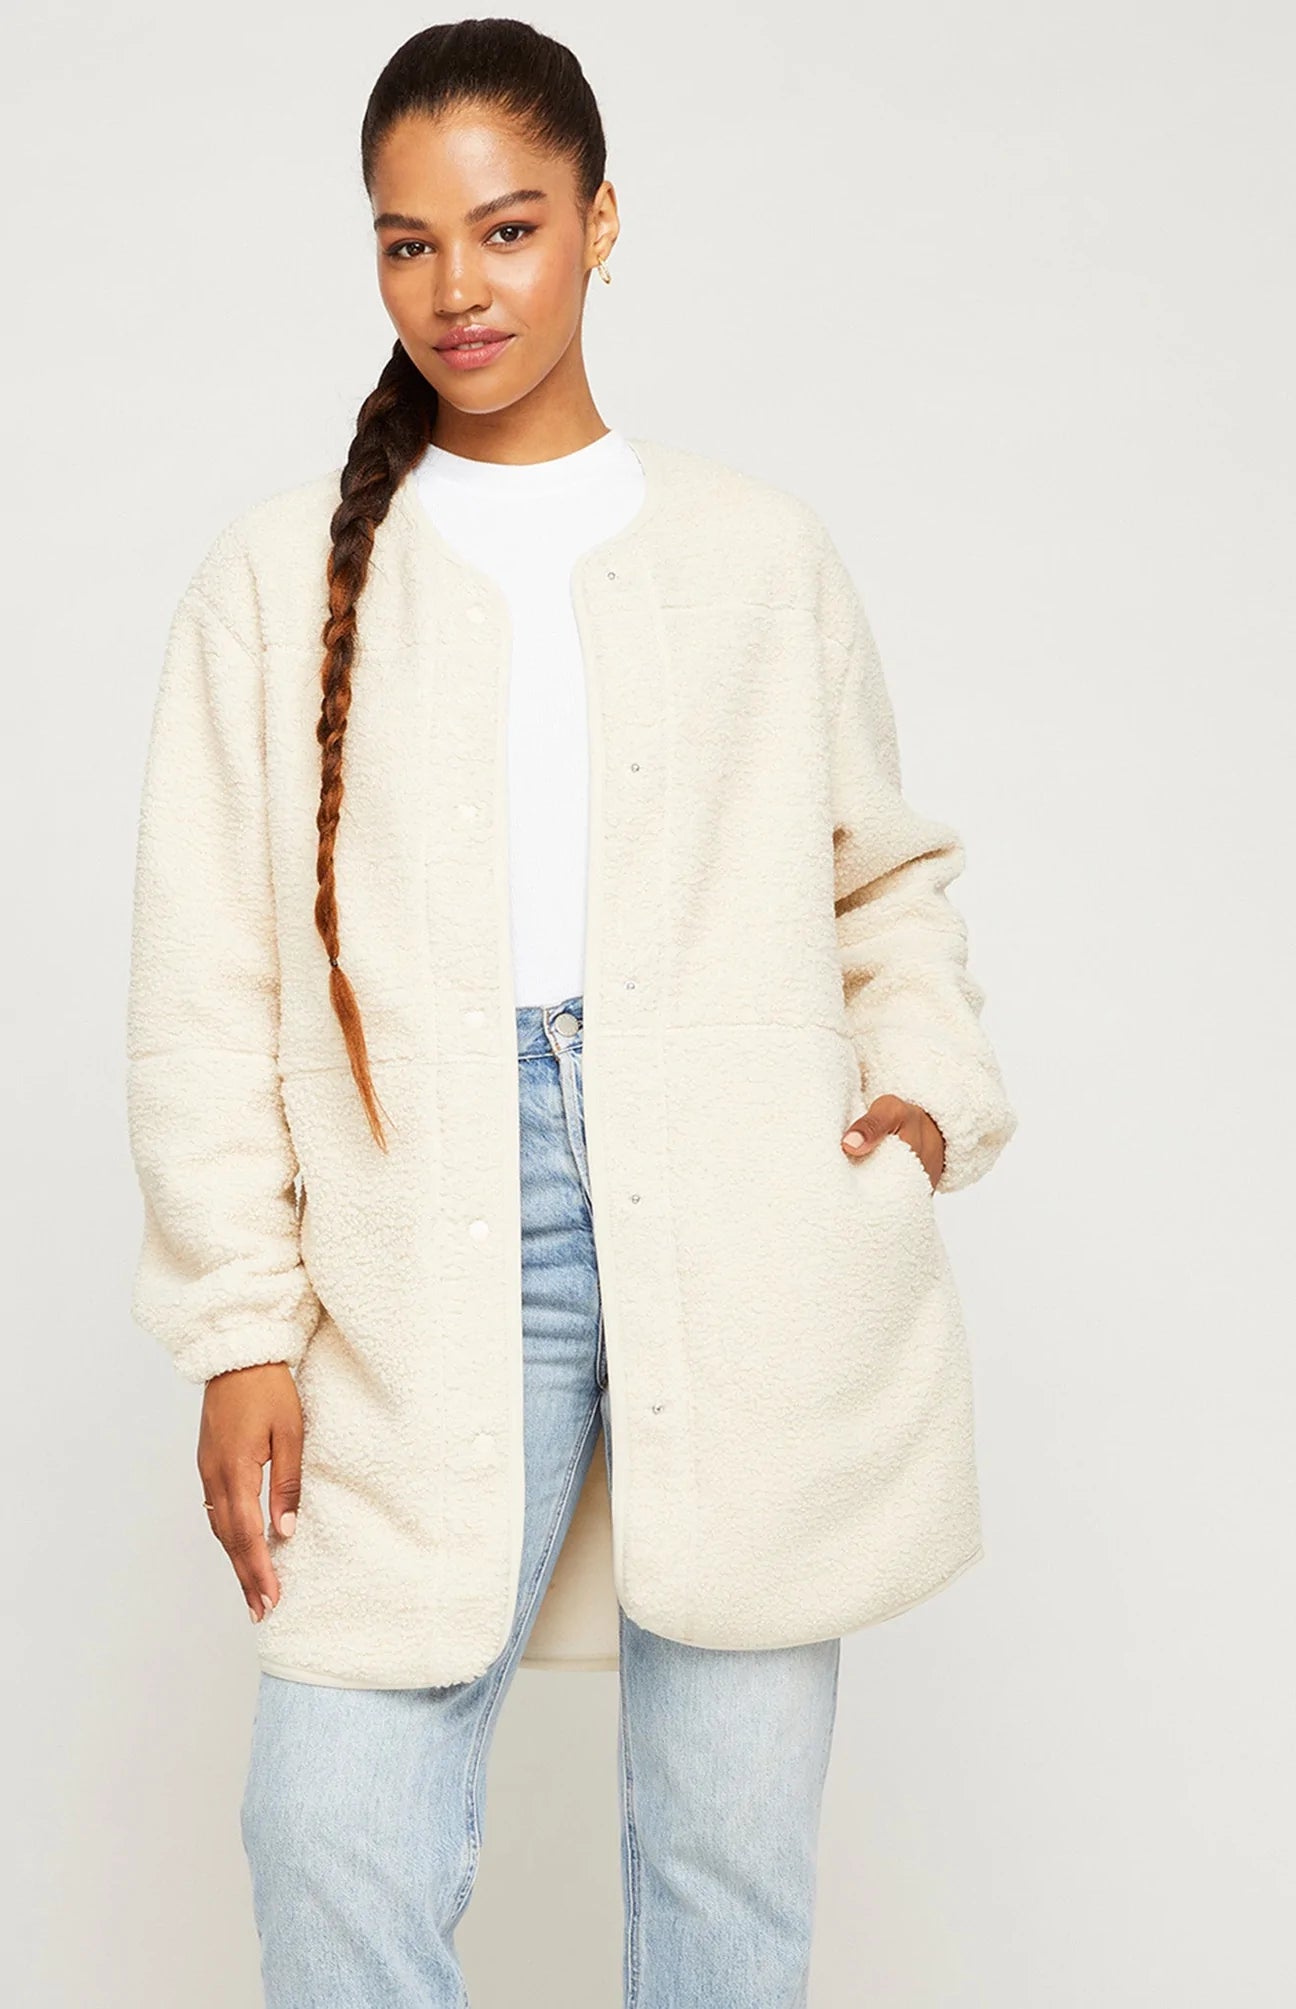 GENTLE FAWN ARIA JACKET